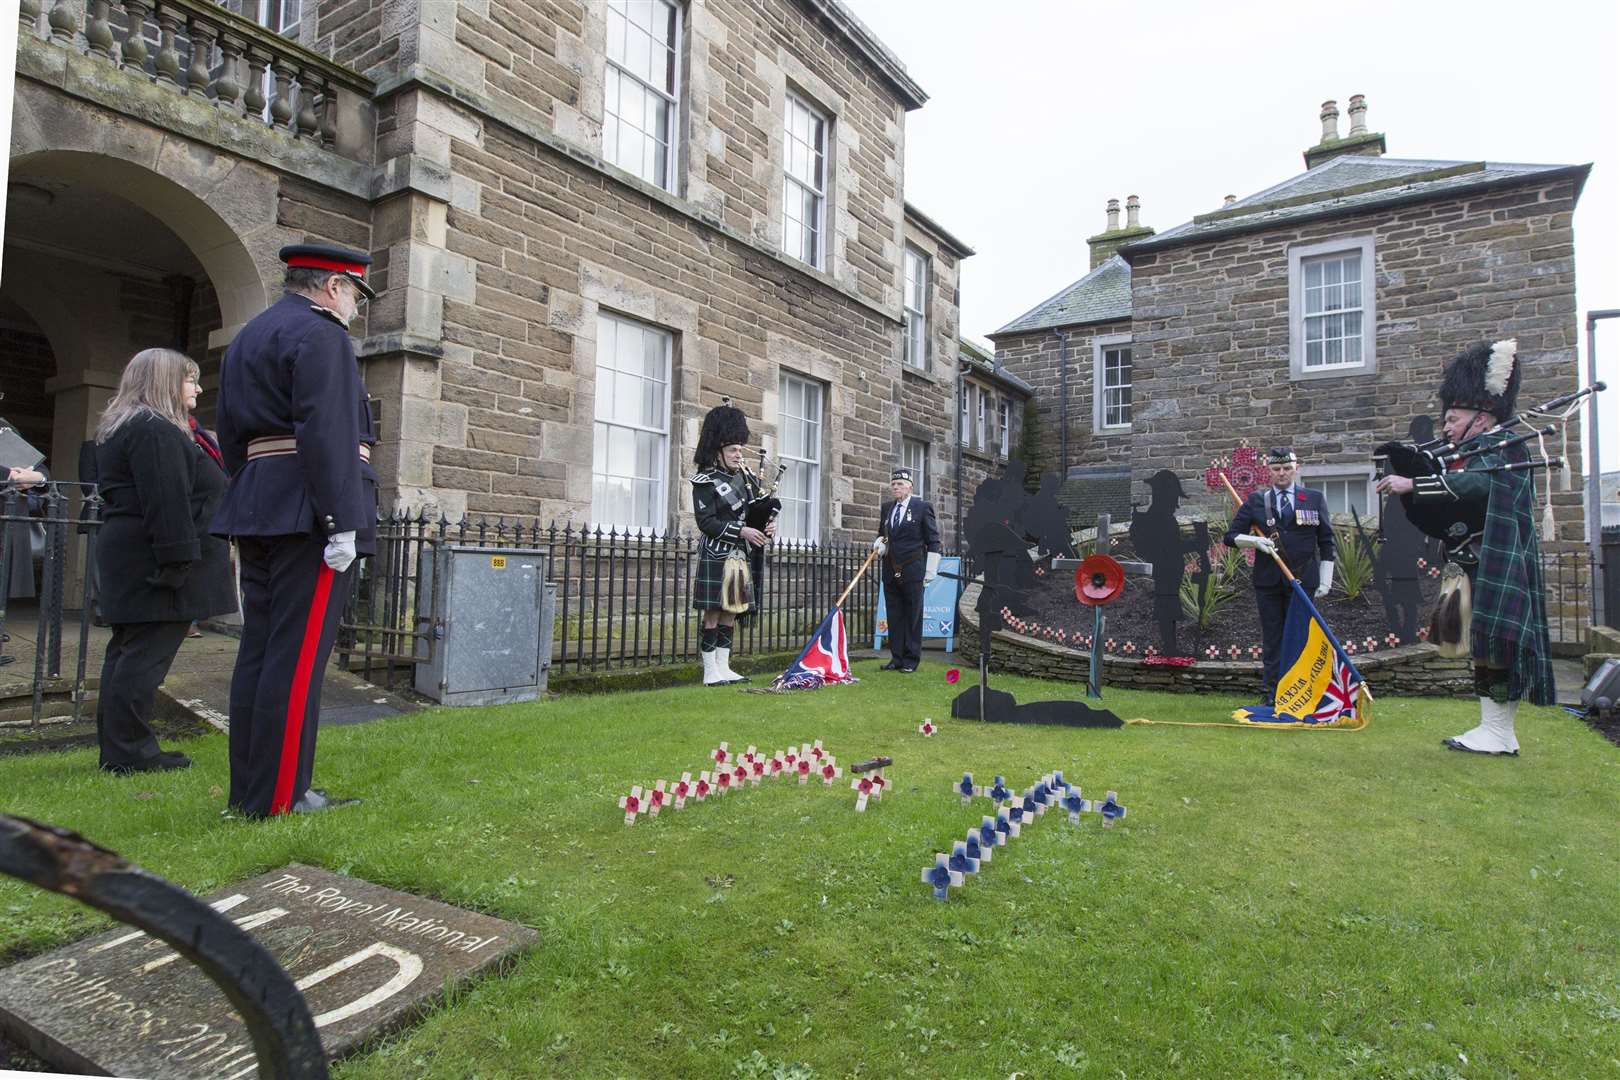 The service in the garden of remembrance beside Wick Town hall on Saturday morning was organised by the Wick, Canisbay and Latheron branch of the Royal British Legion Scotland, with Lord Thurso placing a poppy wreath. Picture: Robert MacDonald / Northern Studios